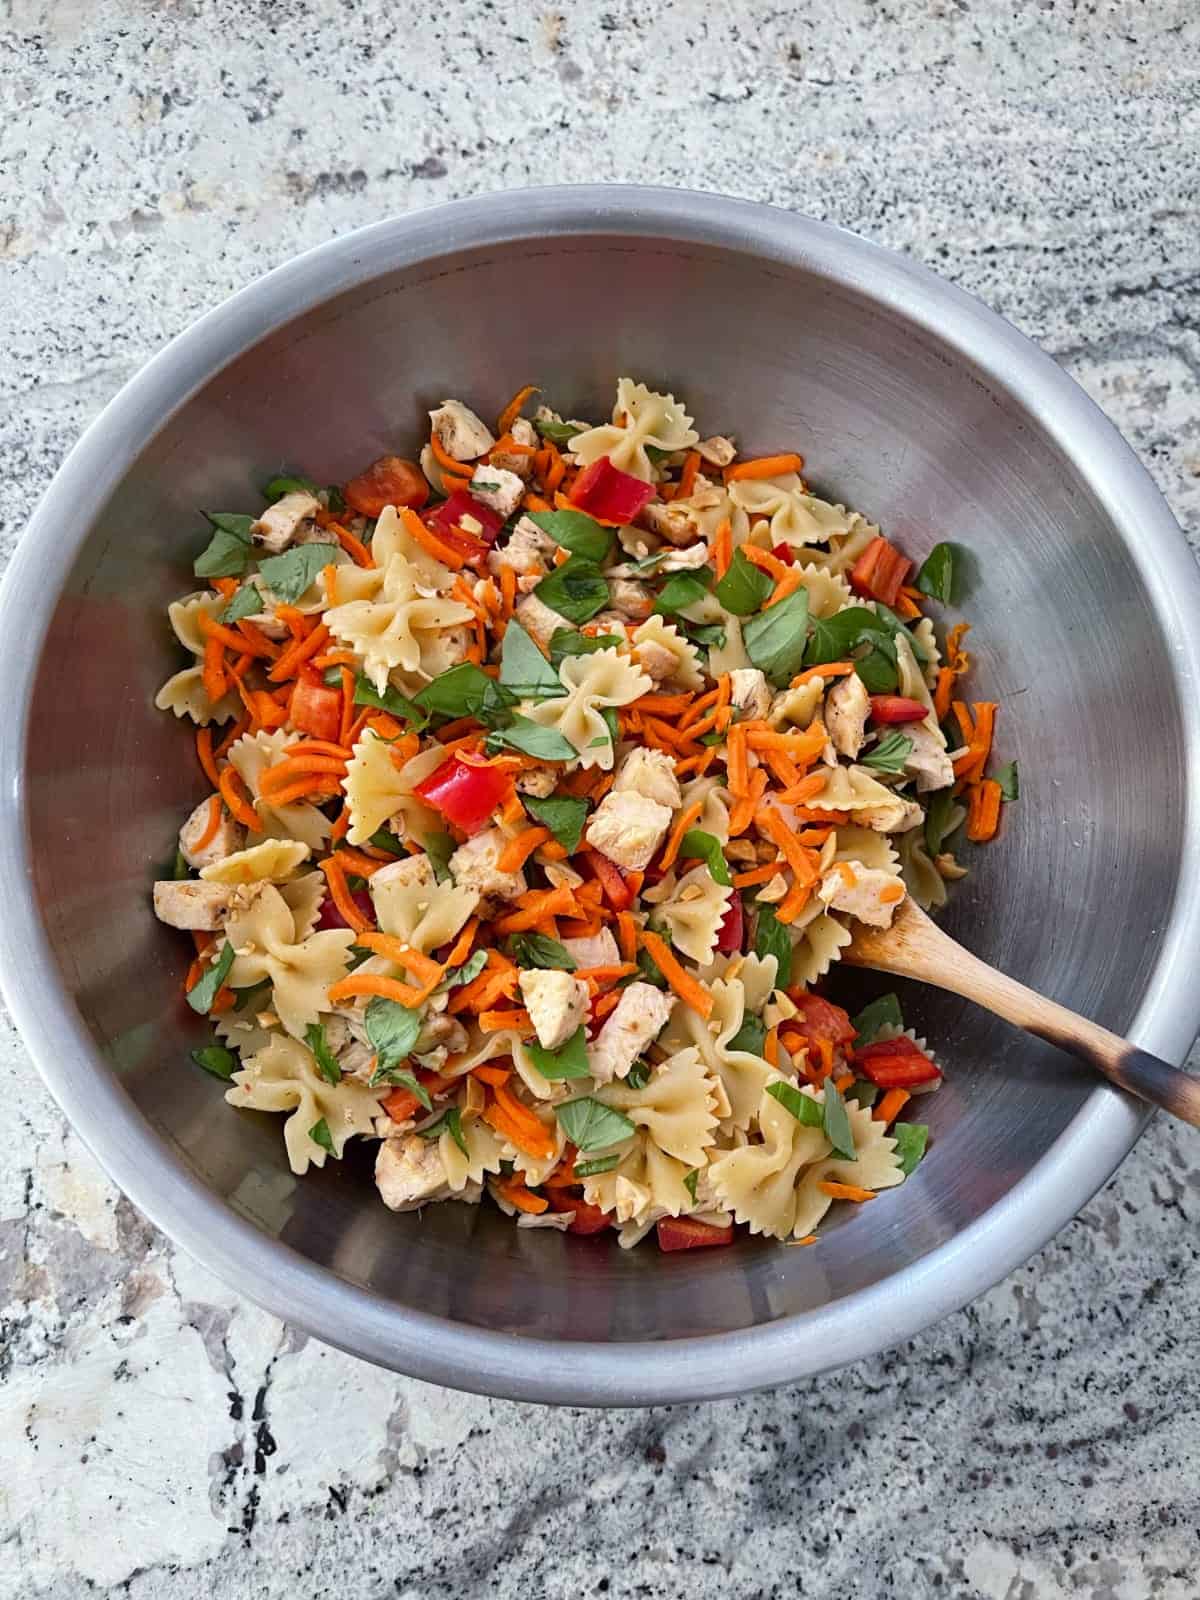 Mixing pasta, chopped basil, red bell pepper, shredded carrots and chopped peanuts in mixing bowl.